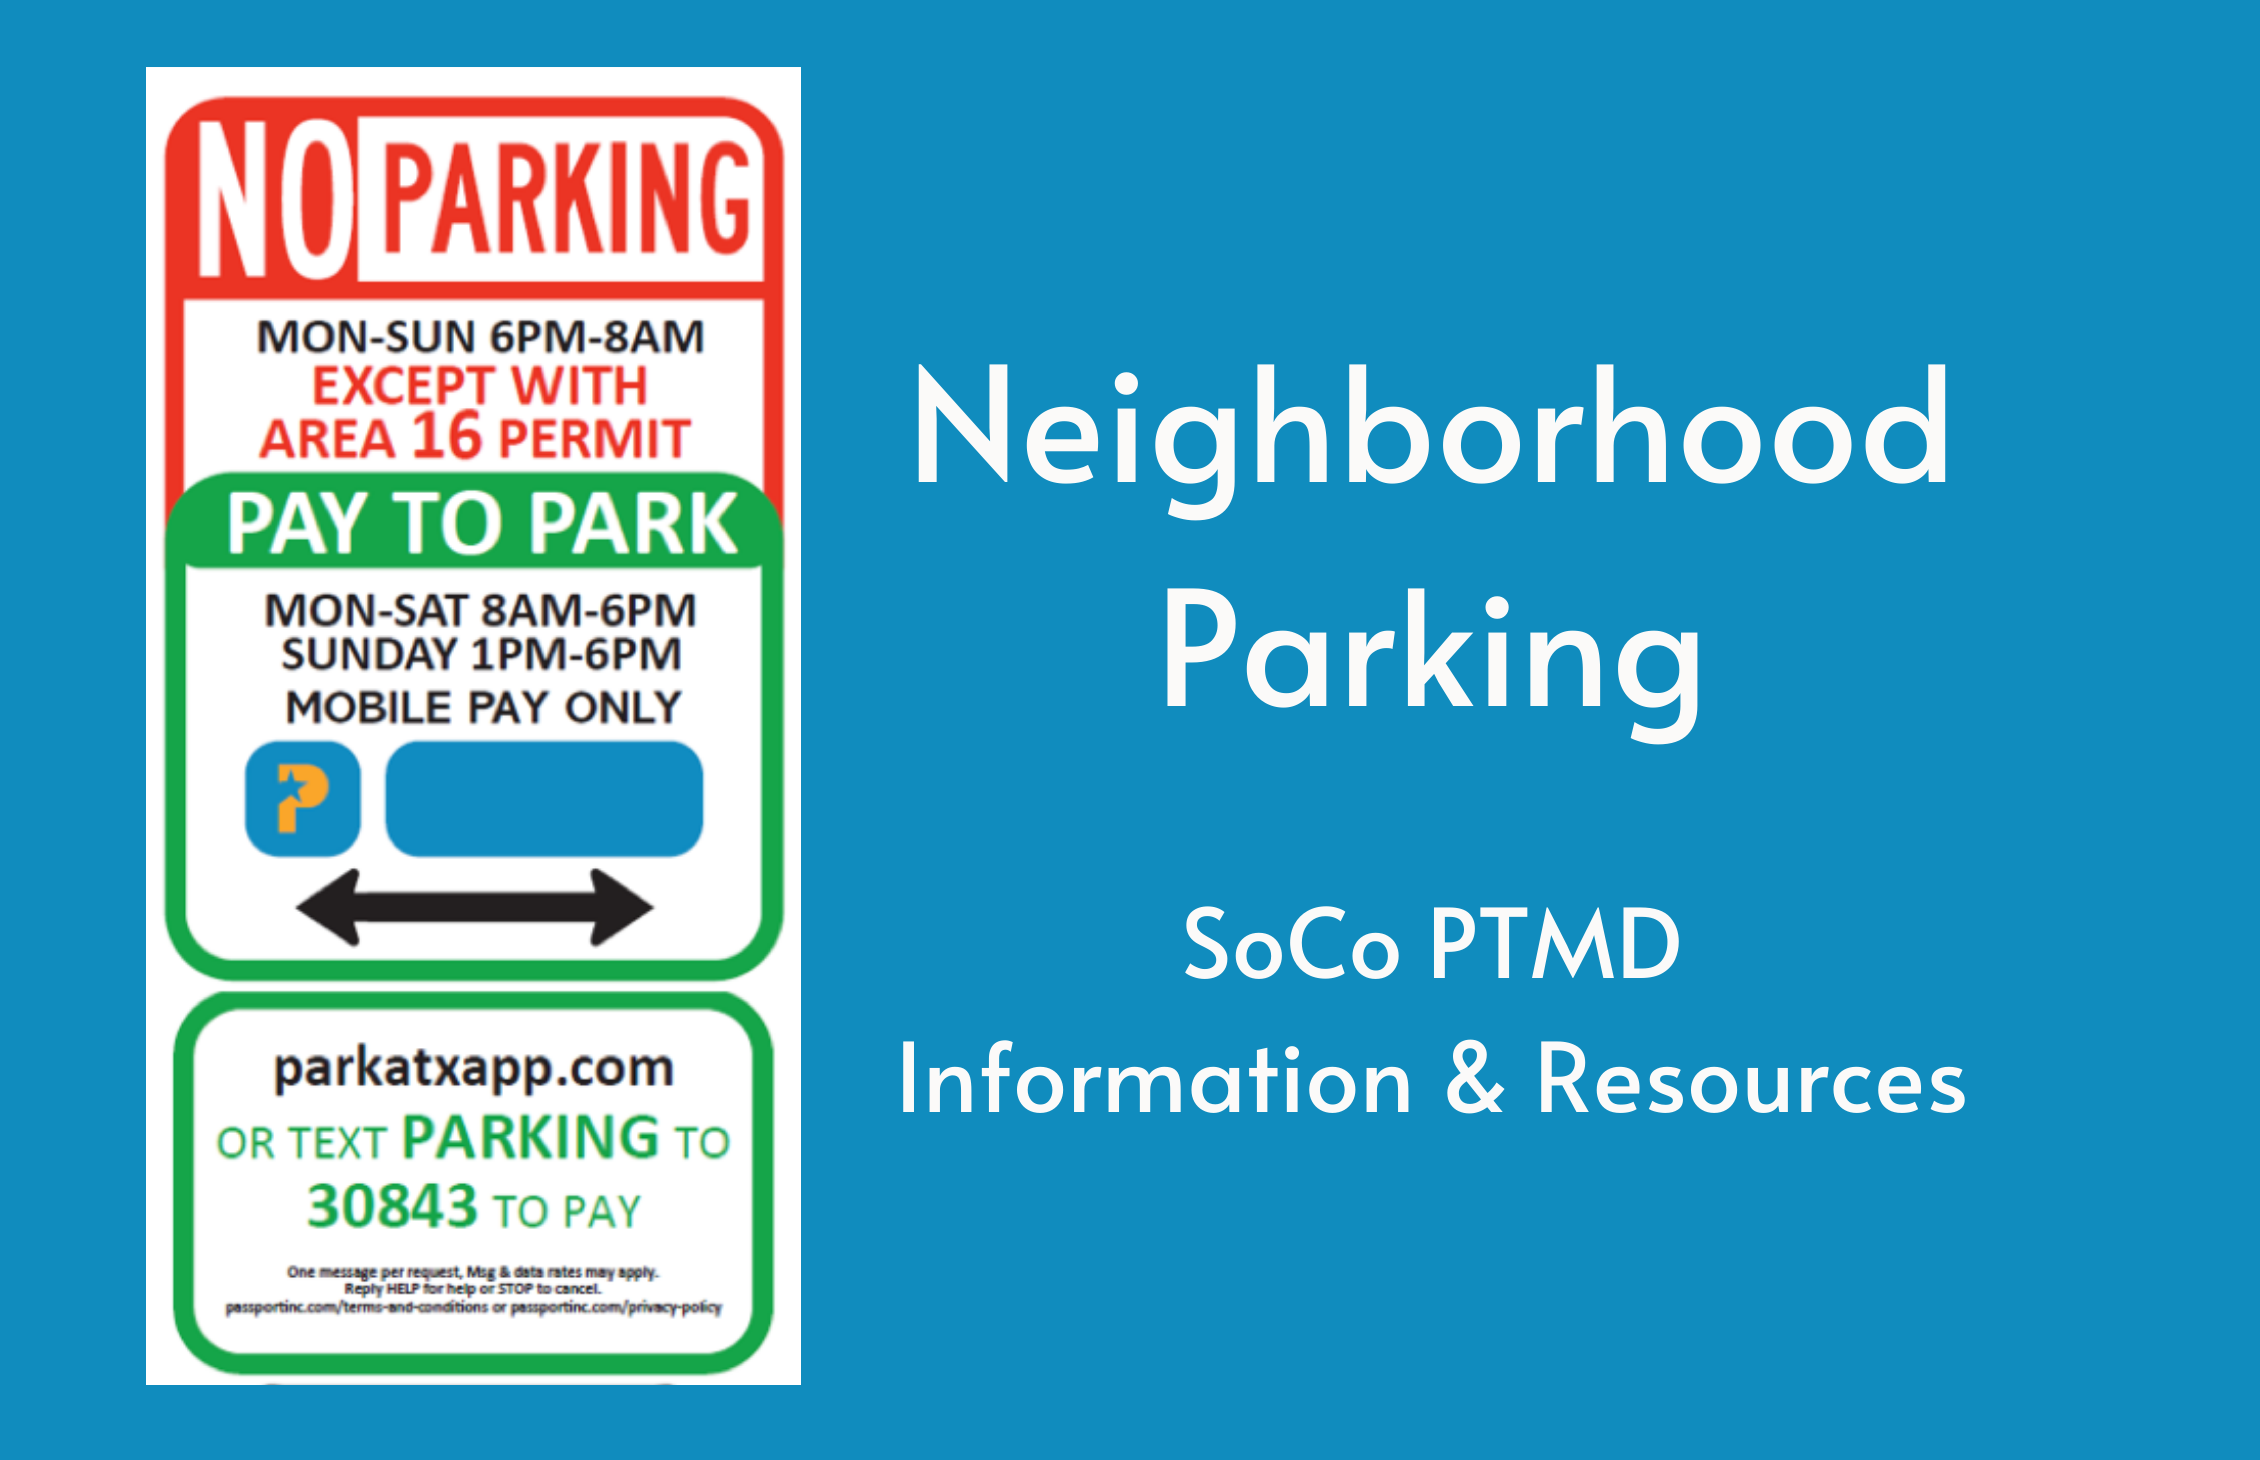 SoCo PTMD is rolling out in the neighborhood